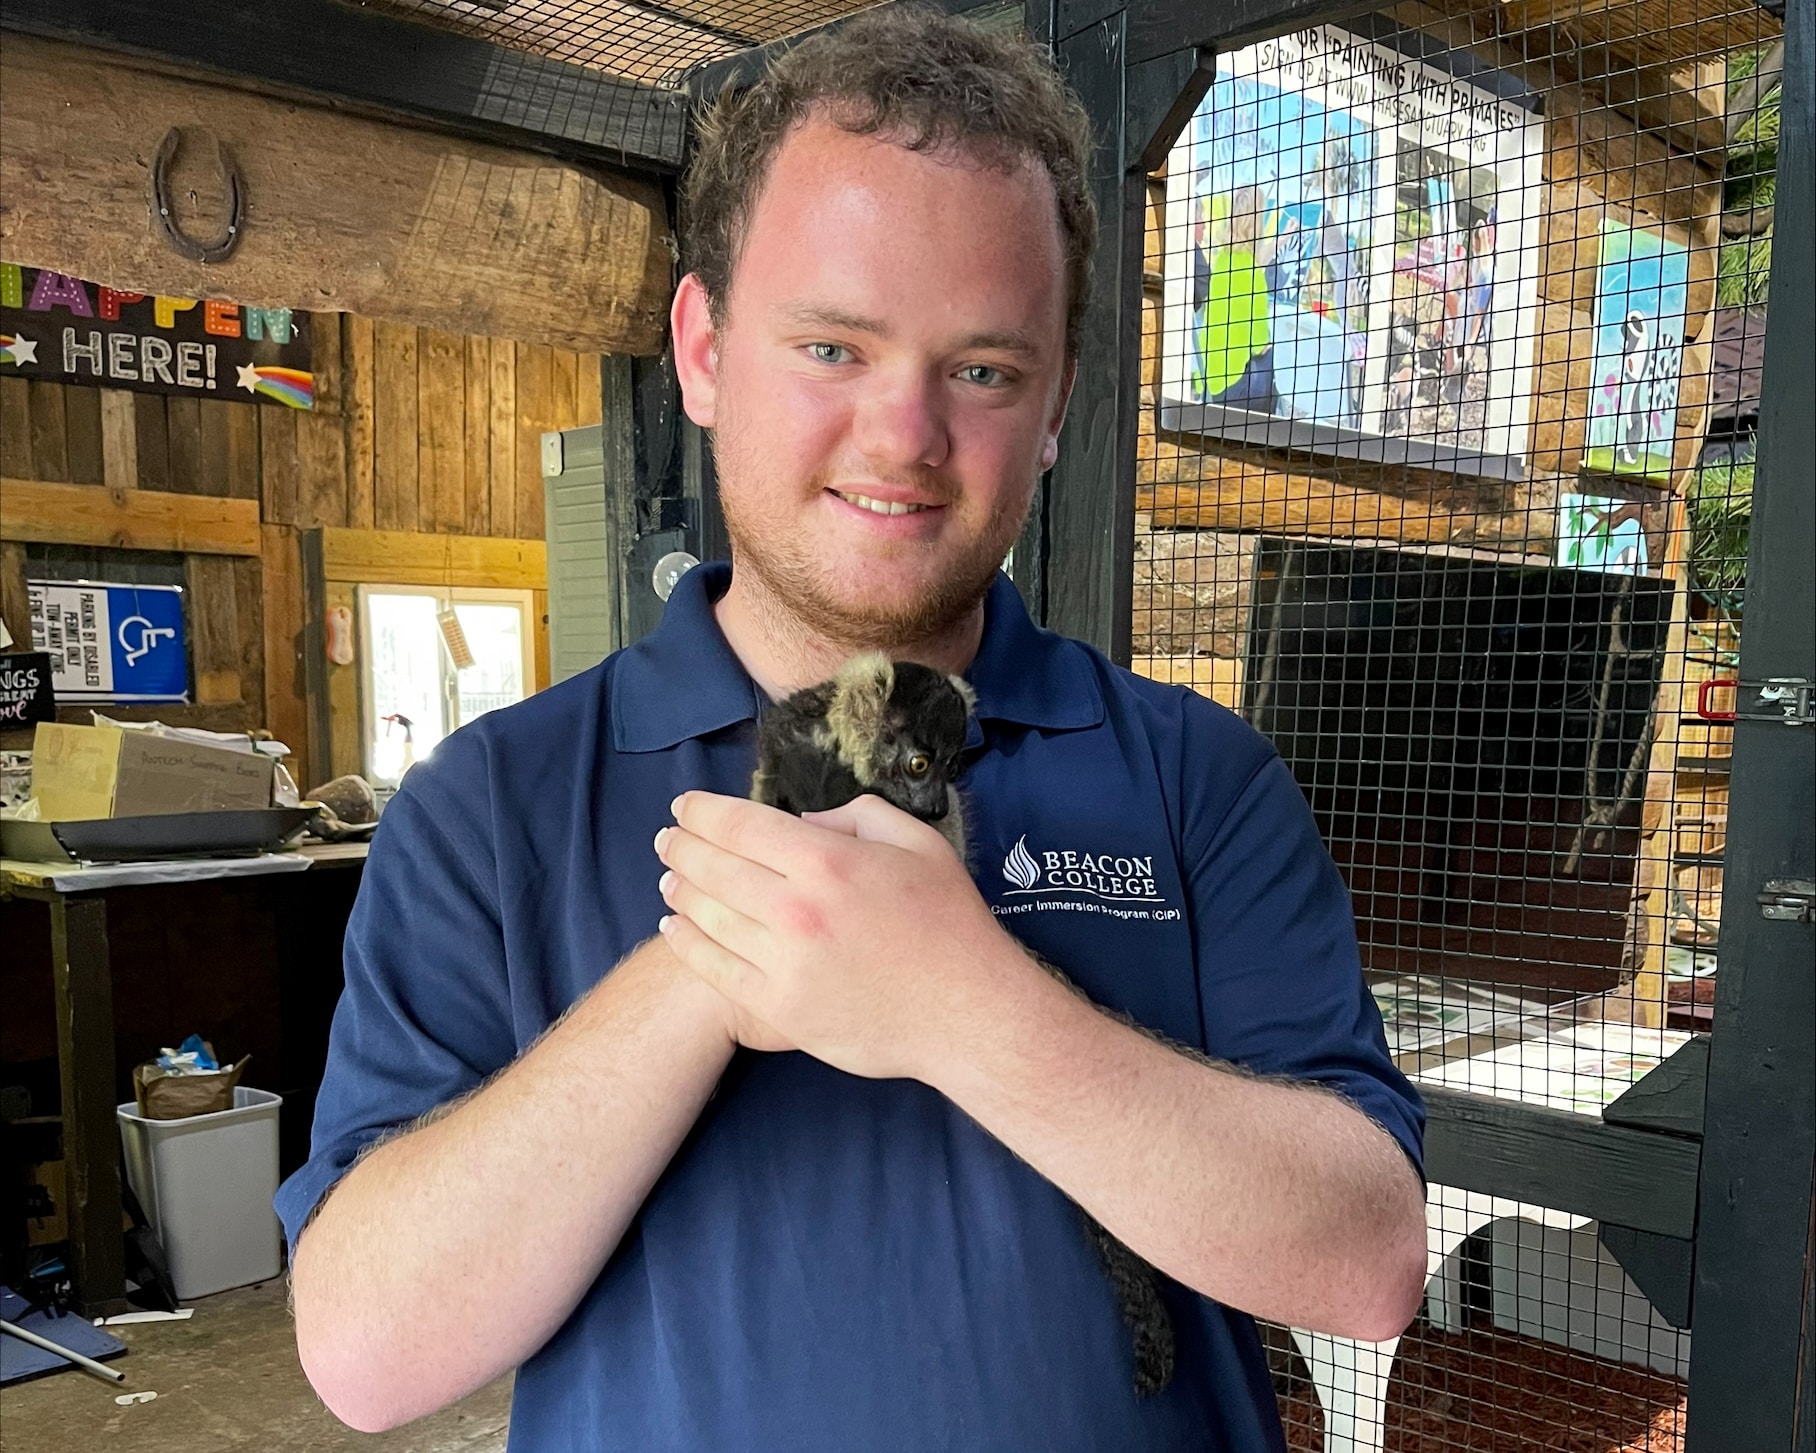 Javier Escudero hangs out with a furry friend during his summer internship through the Beacon Career Immersion Program.